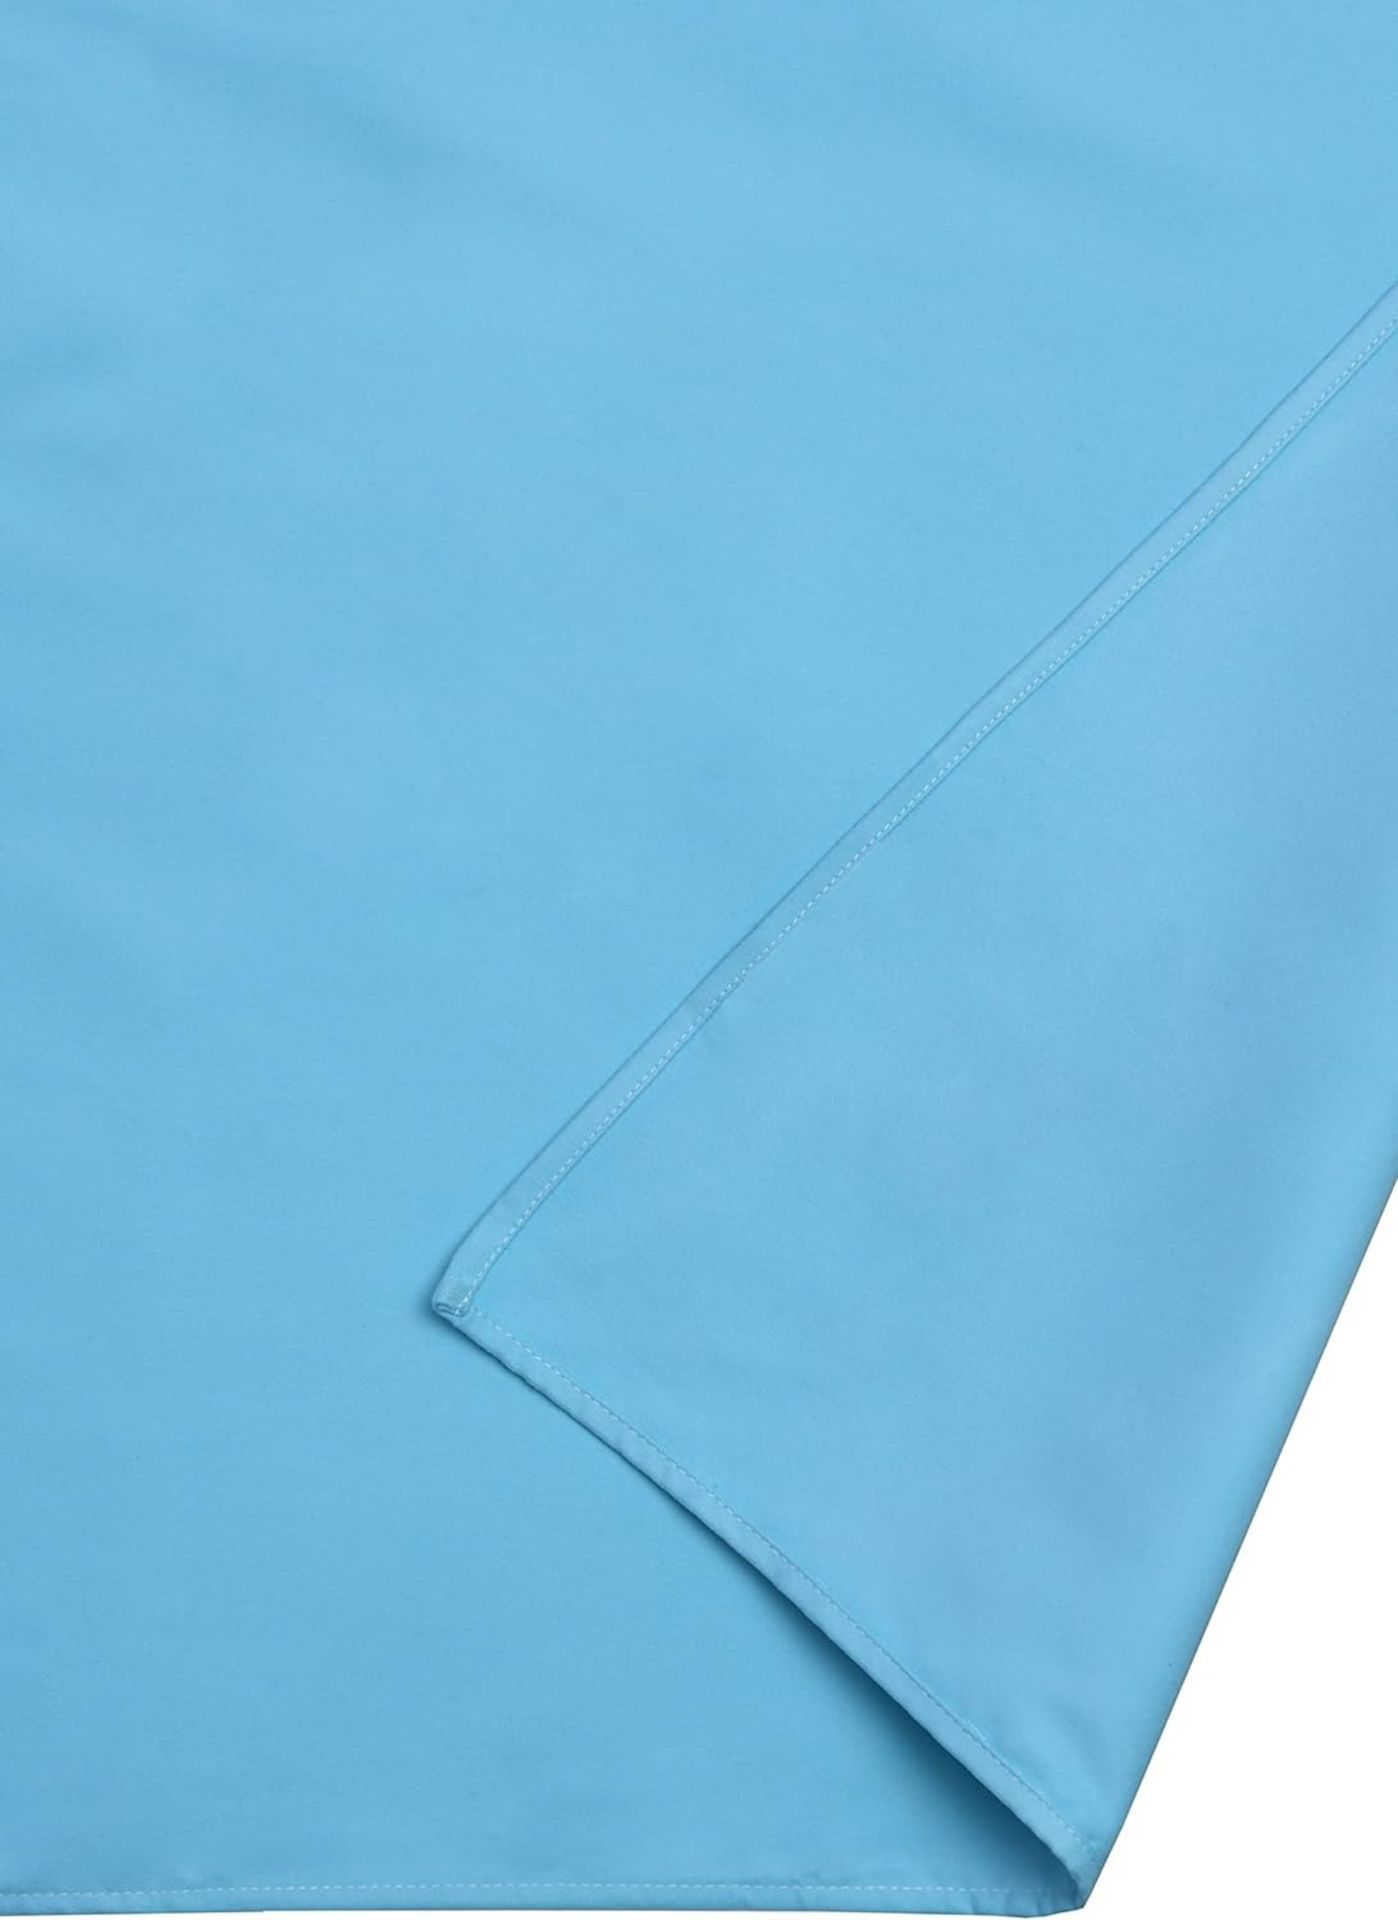 11x NEW & PACKAGED SLEEPDOWN Quick Dry Beach Towel 90 x 160cm With Carry Pouch - AQUA. RRP £21.99 - Image 4 of 4